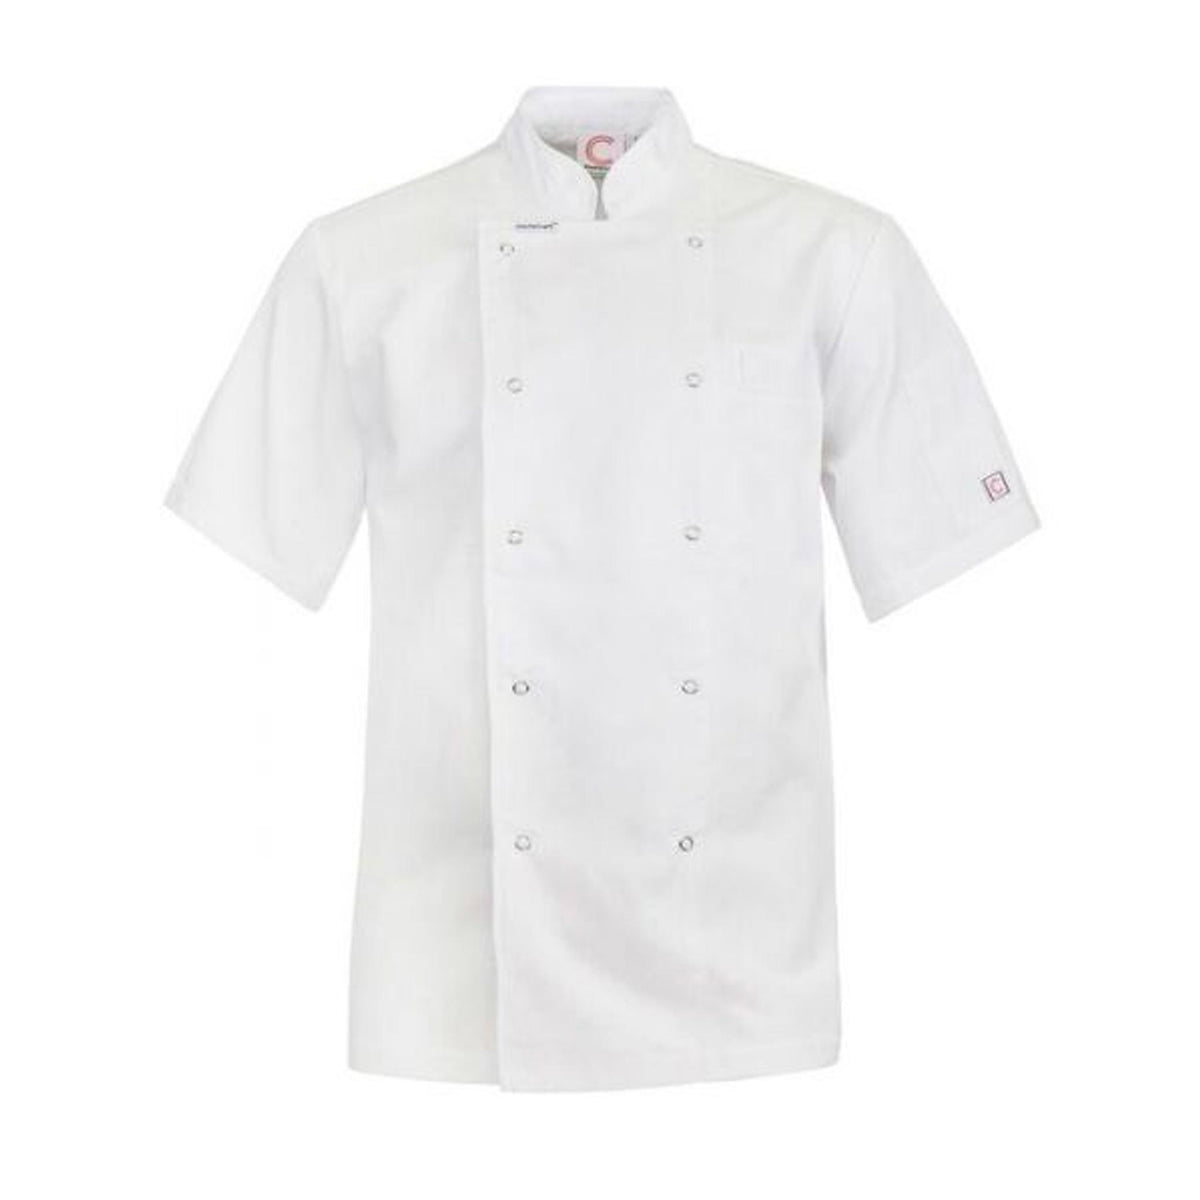 white short sleeve executive chefs jacket with press studs